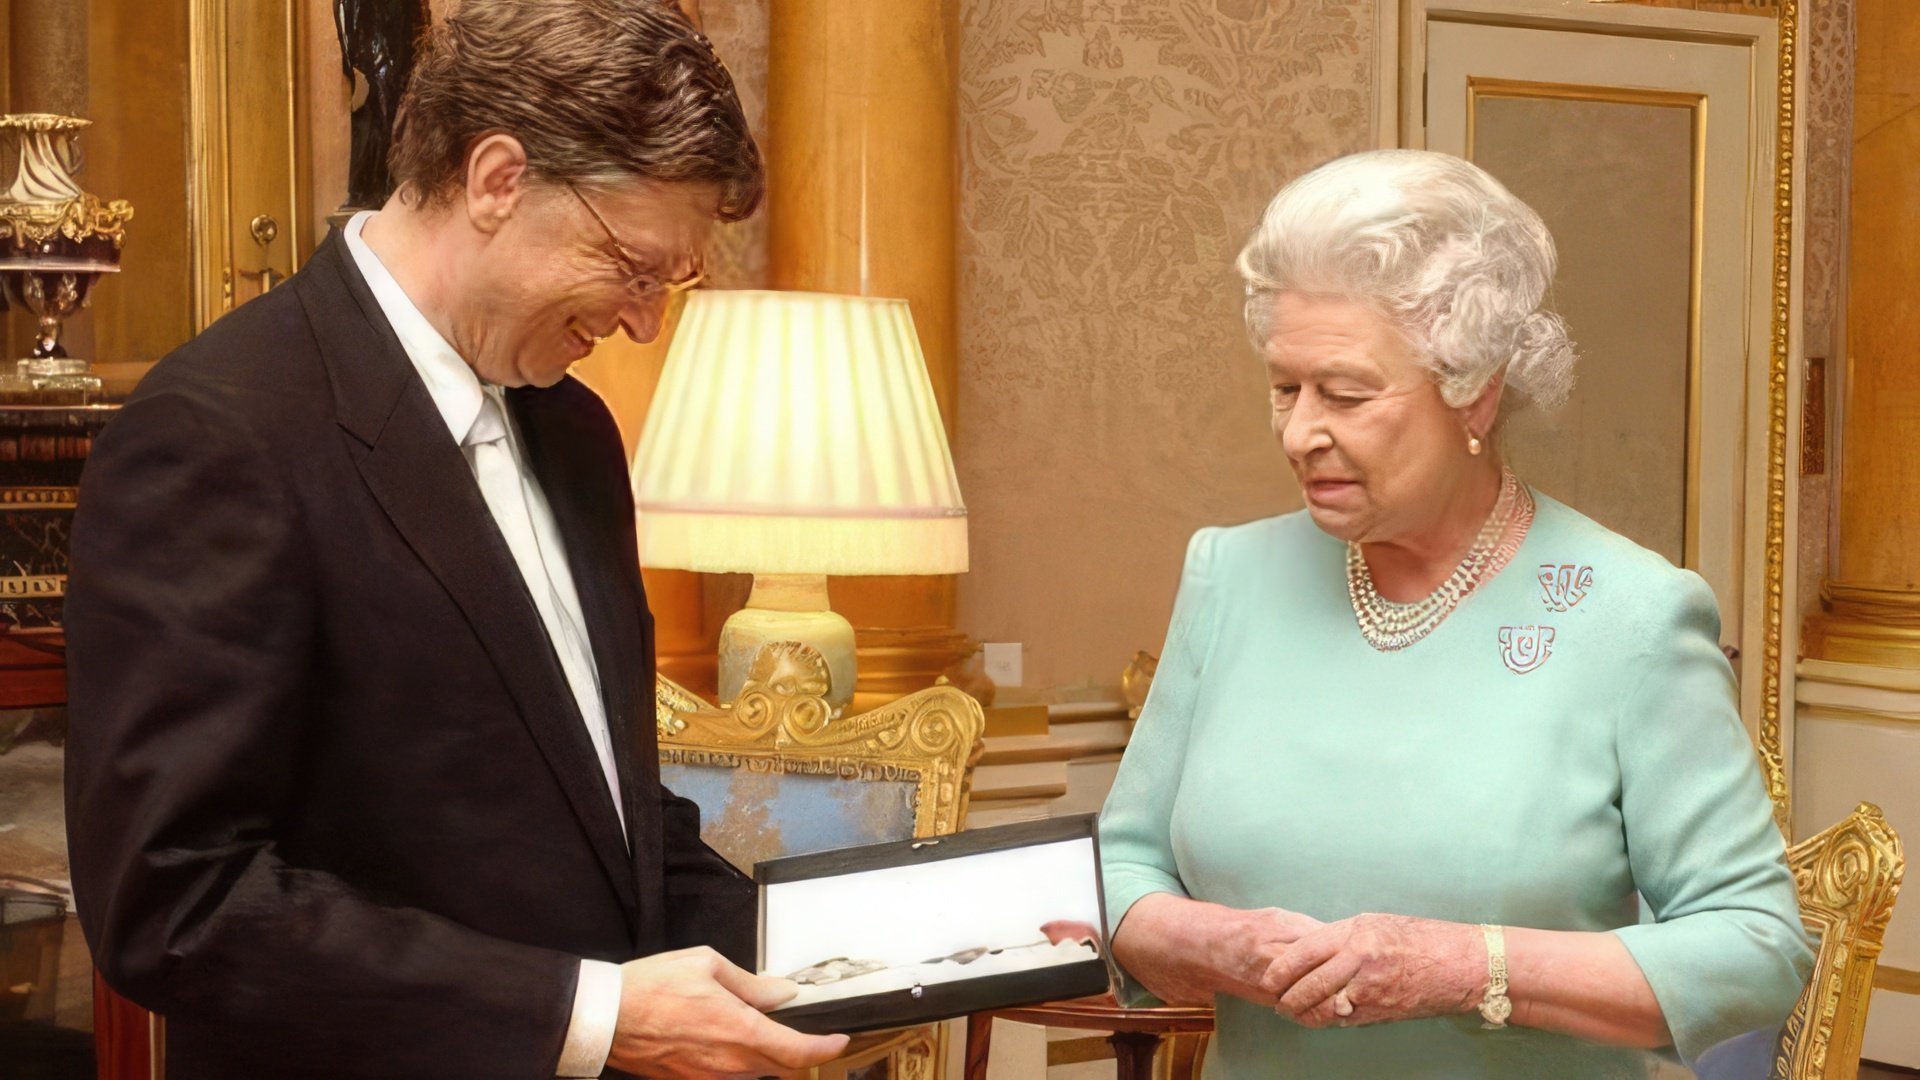 Bill Gates was honored with the title of Knight Commander of the Order of the British Empire